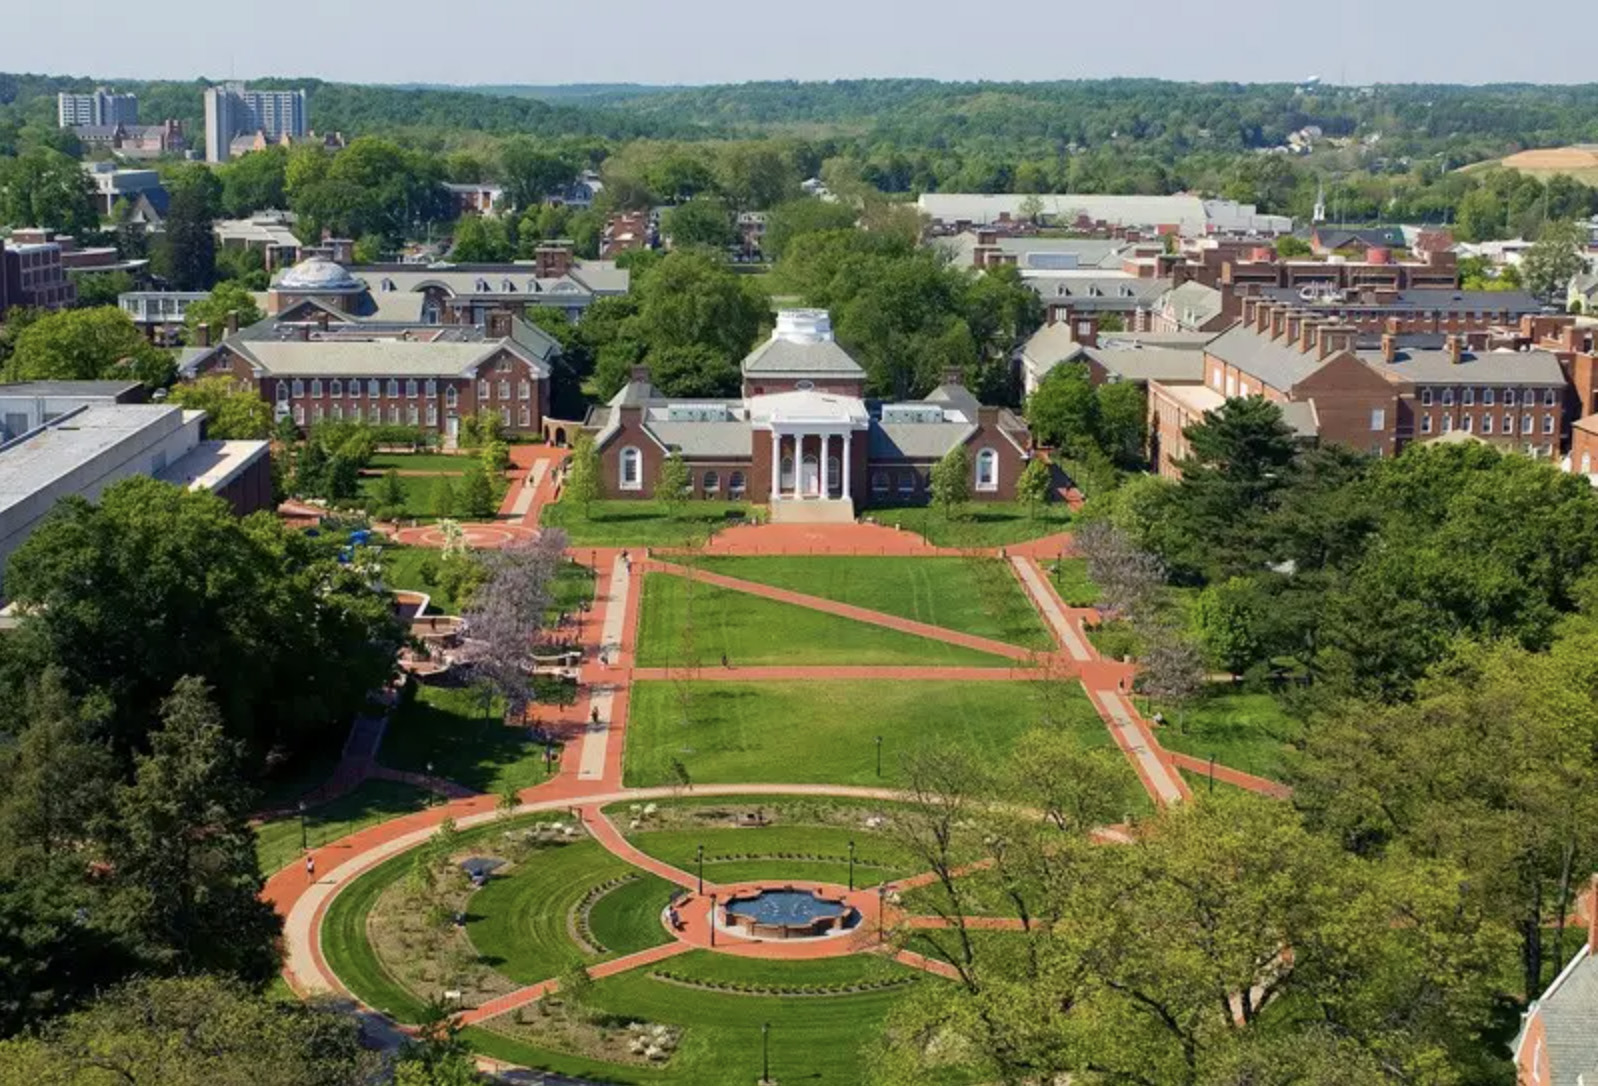 Aerial view of the University of Delaware campus